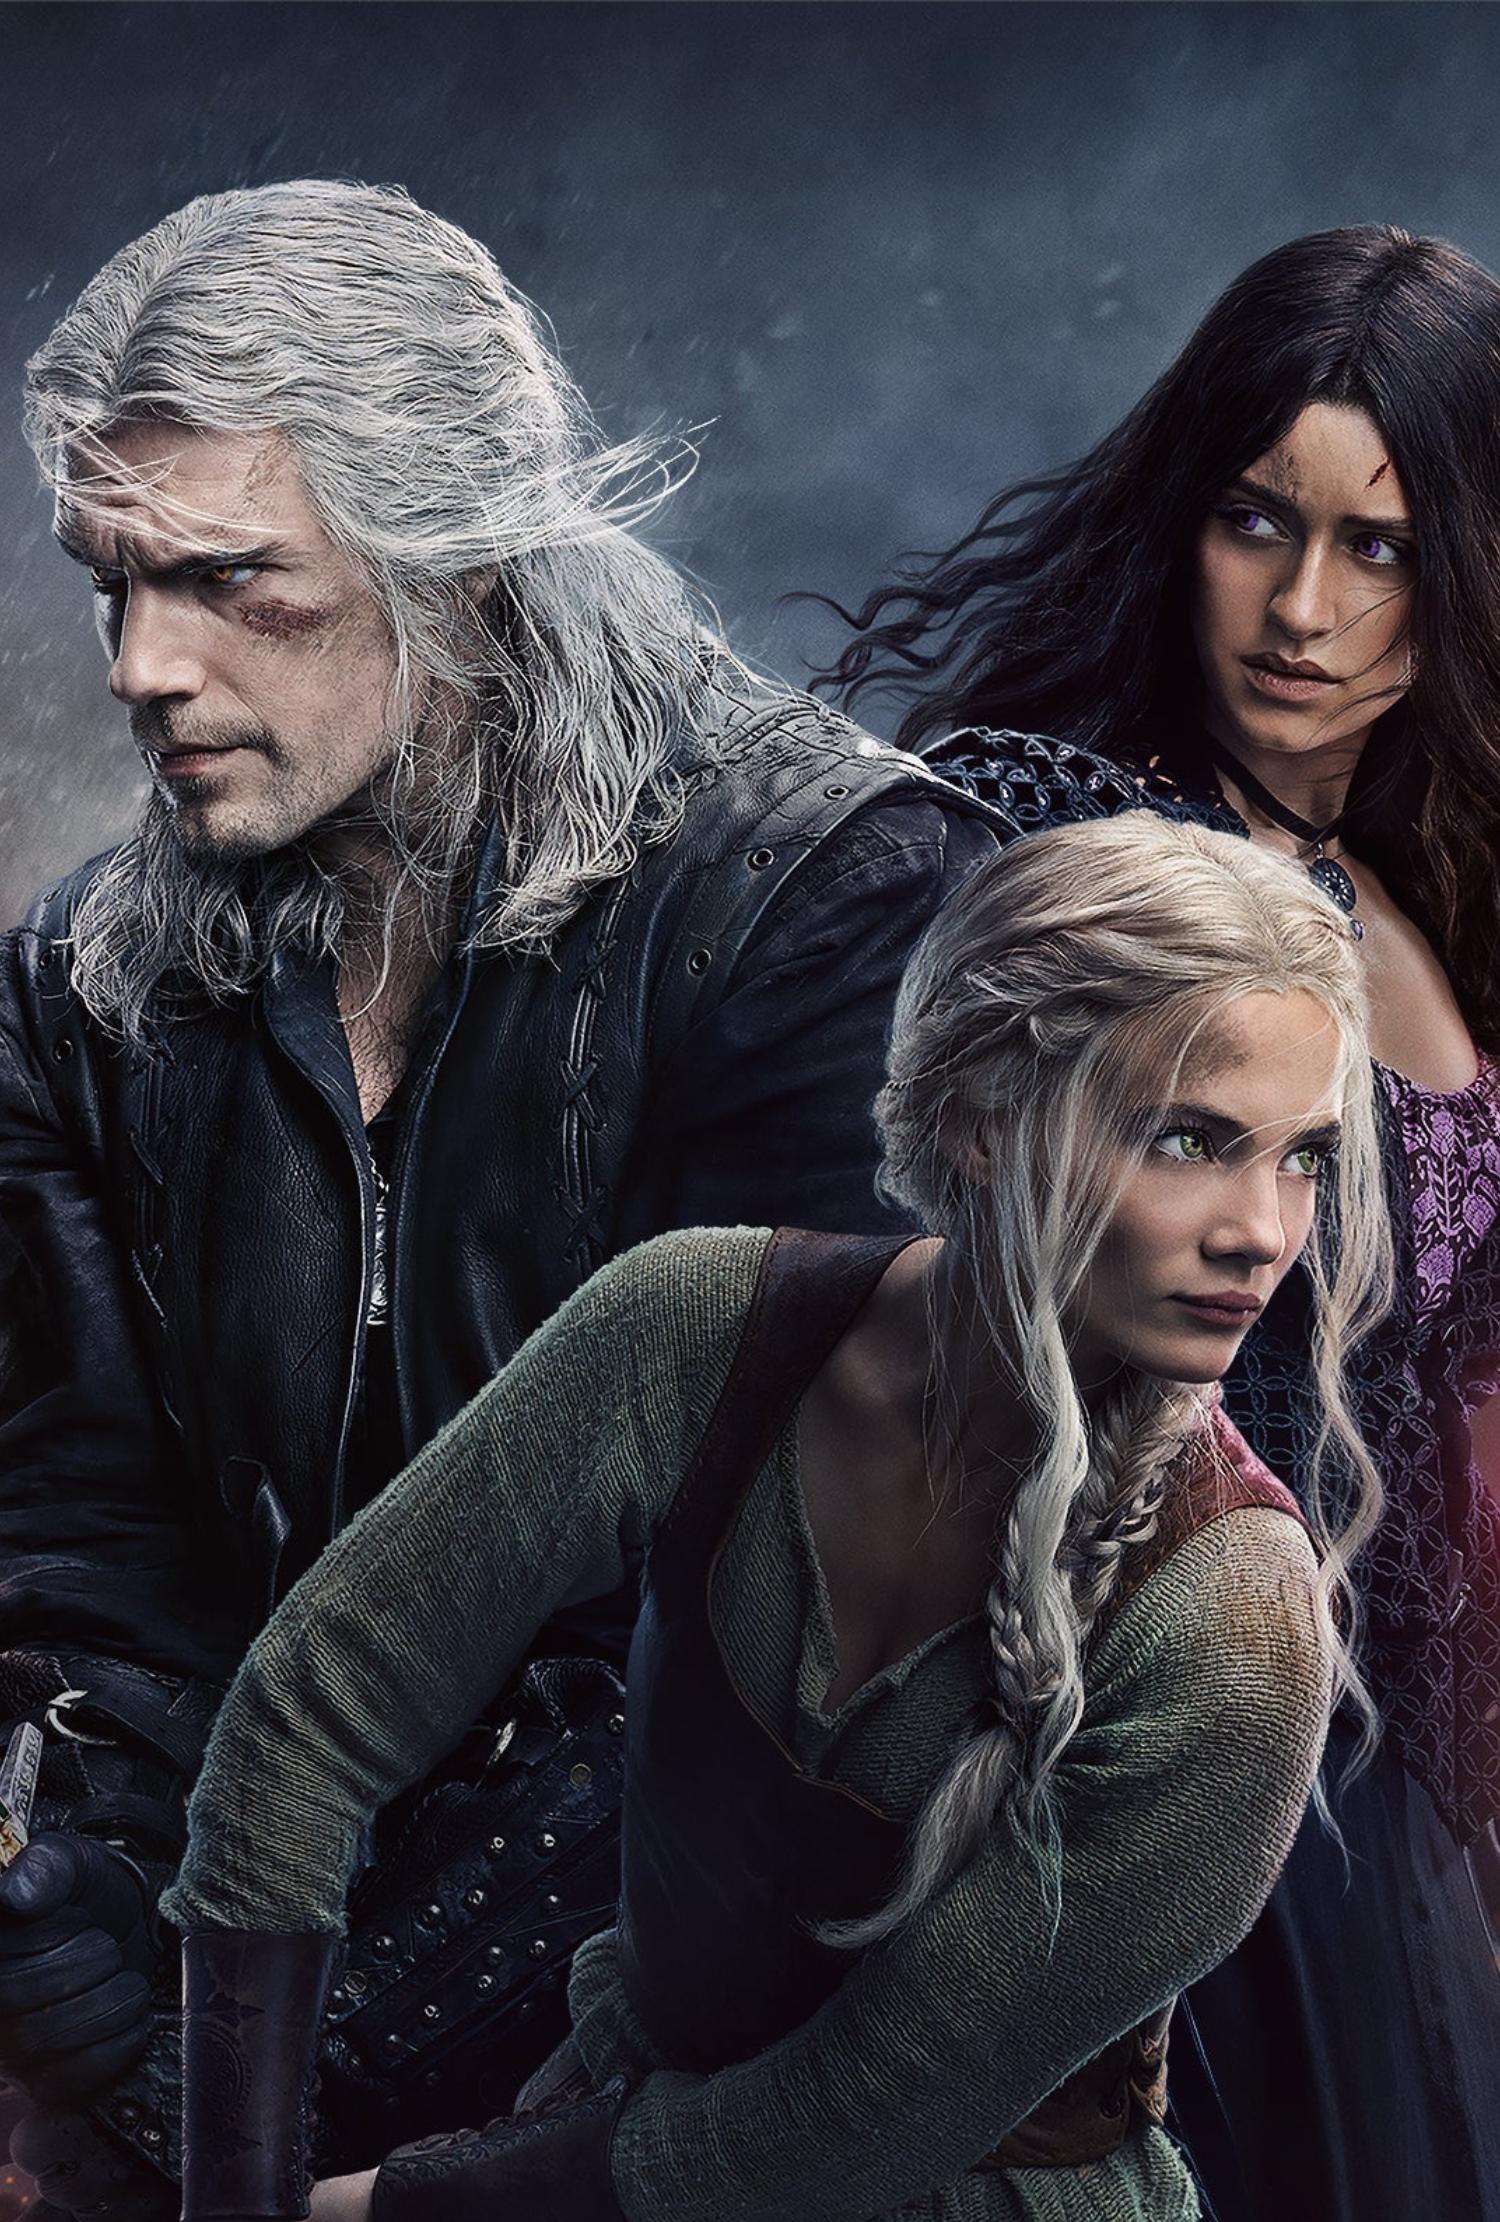 The Witcher Season 3 Volume 1 (June 29) -  War rages on the Continent as The Witcher returns for its third outing. With monarchs, mages and monsters vying to ensnare her, Geralt (Henry Cavill) takes Ciri (Freya Allan) into hiding. Tasked with training Ciri in the ways of magic, Yennefer (Anya Chalotra) guides them to the shielded fortress of Aretuza, where they hope to learn more about the Cintrian princess’s hidden powers. Unfortunately, the trio finds themselves in the murky depths of political corruption, dark magic, murder and betrayal. The season will premiere in two volumes, with the second one dropping on July 27.